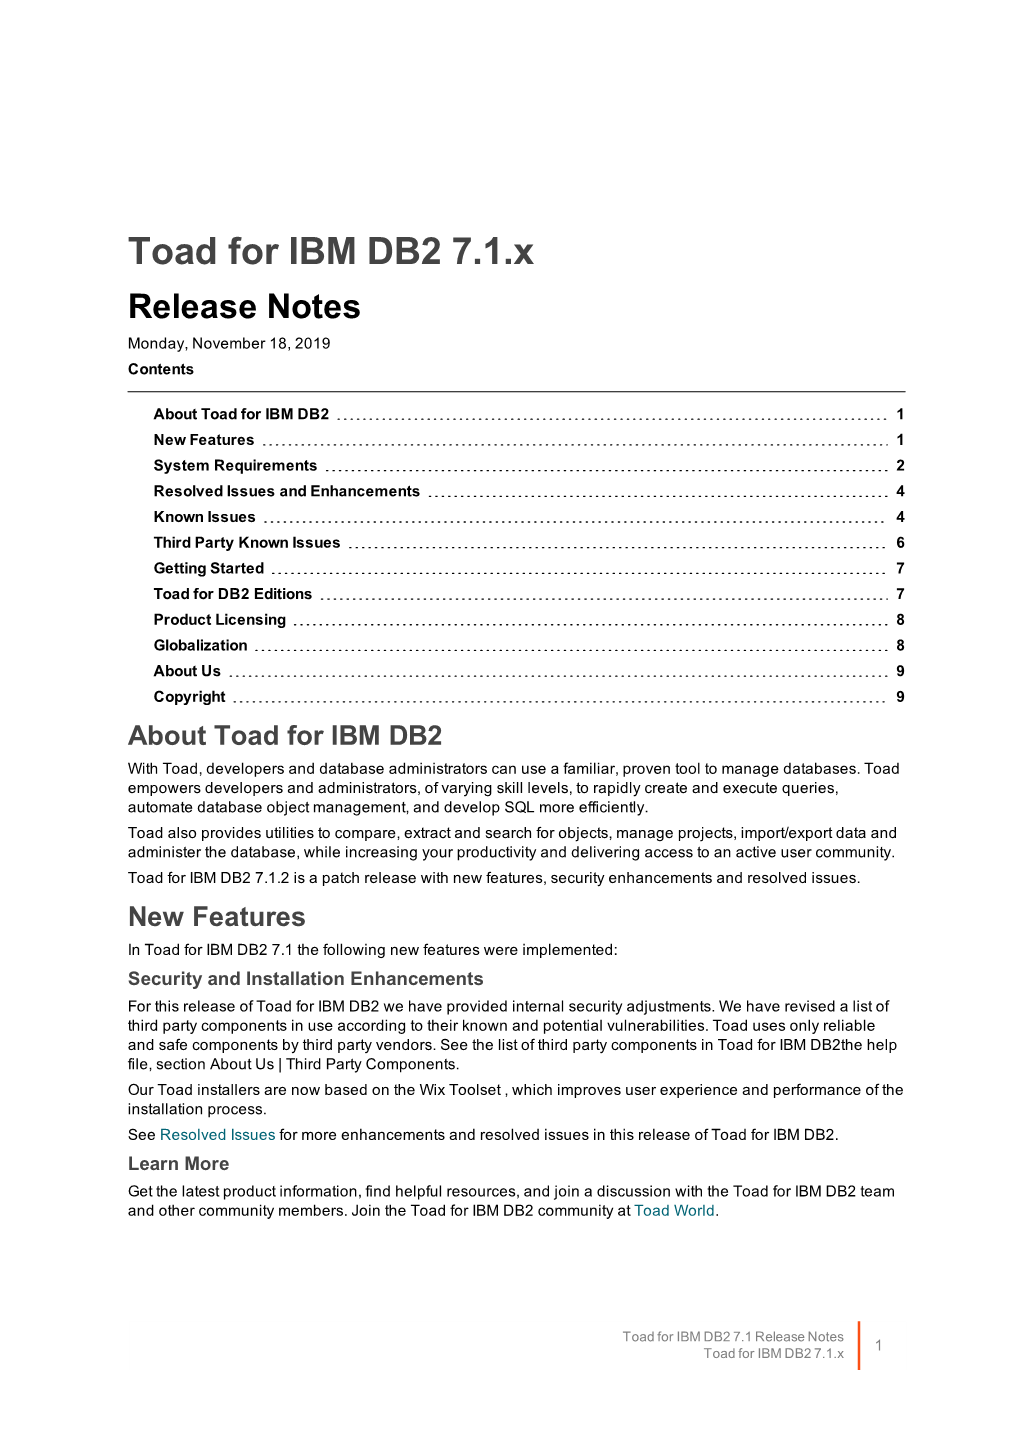 Toad for IBM DB2 Release Notes